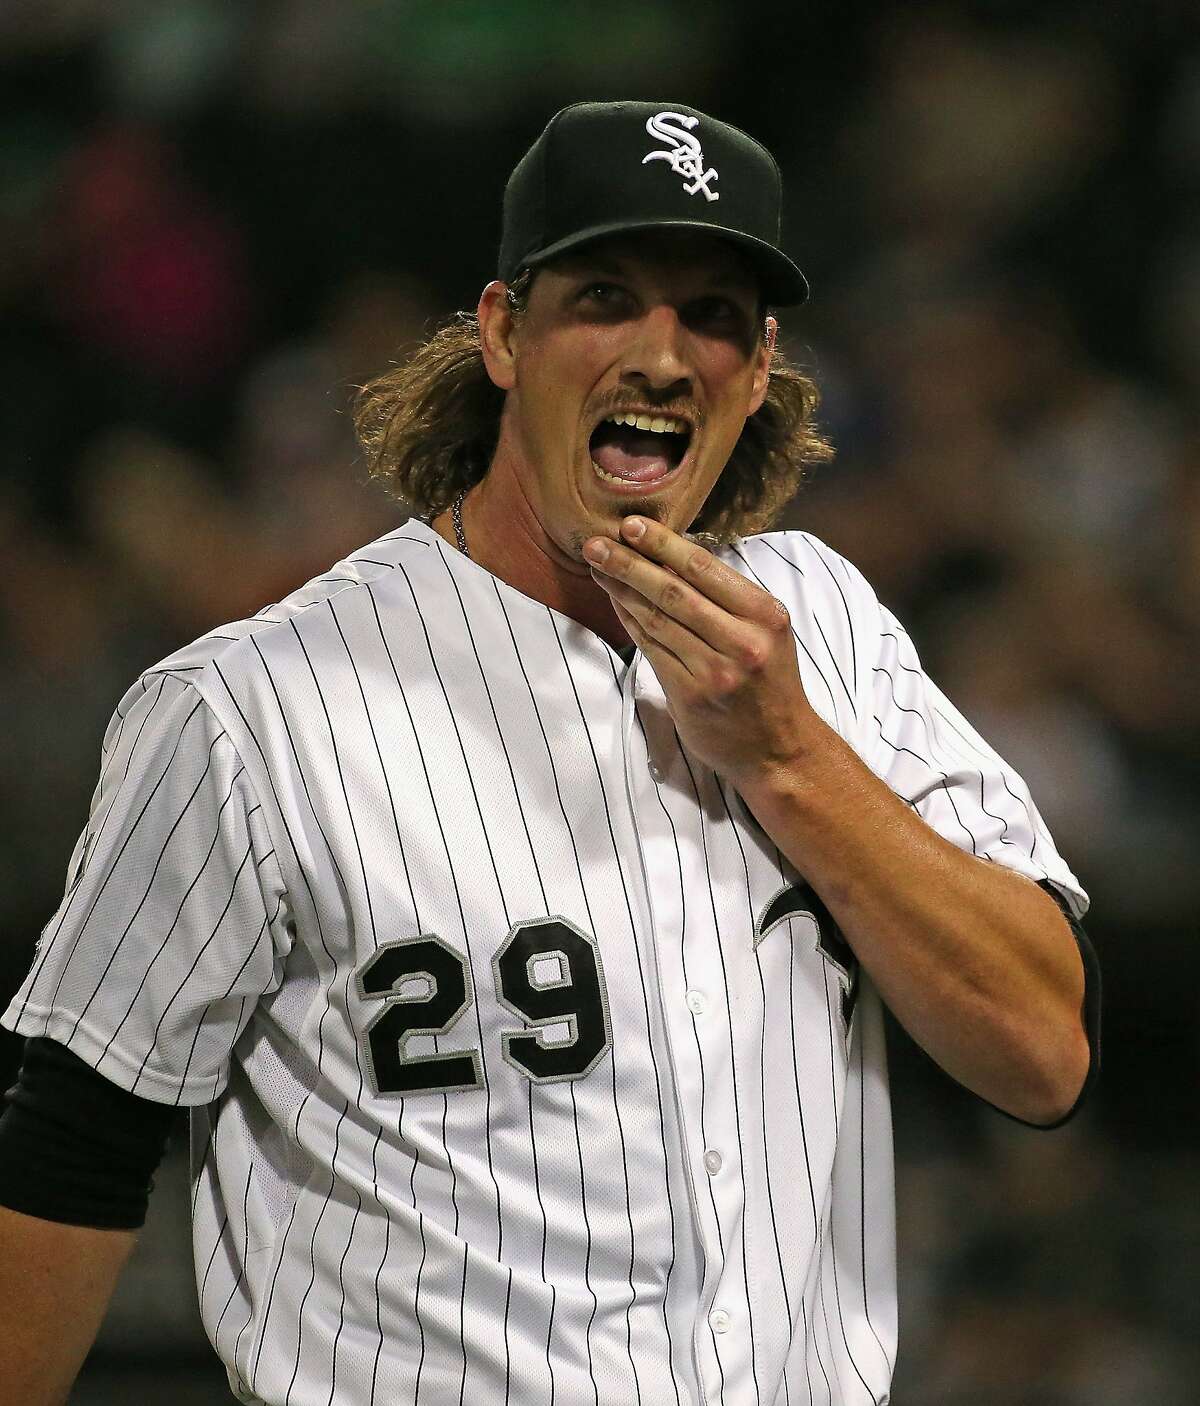 CHICAGO, IL - SEPTEMBER 15: Starting pitcher Jeff Samardzija #29 of the Chicago White Sox reacts as he leaves the field after the top of the 1st inning after giving up 5 runs to the Oakland Athletics at U.S. Cellular Field on September 15, 2015 in Chicago, Illinois. (Photo by Jonathan Daniel/Getty Images)